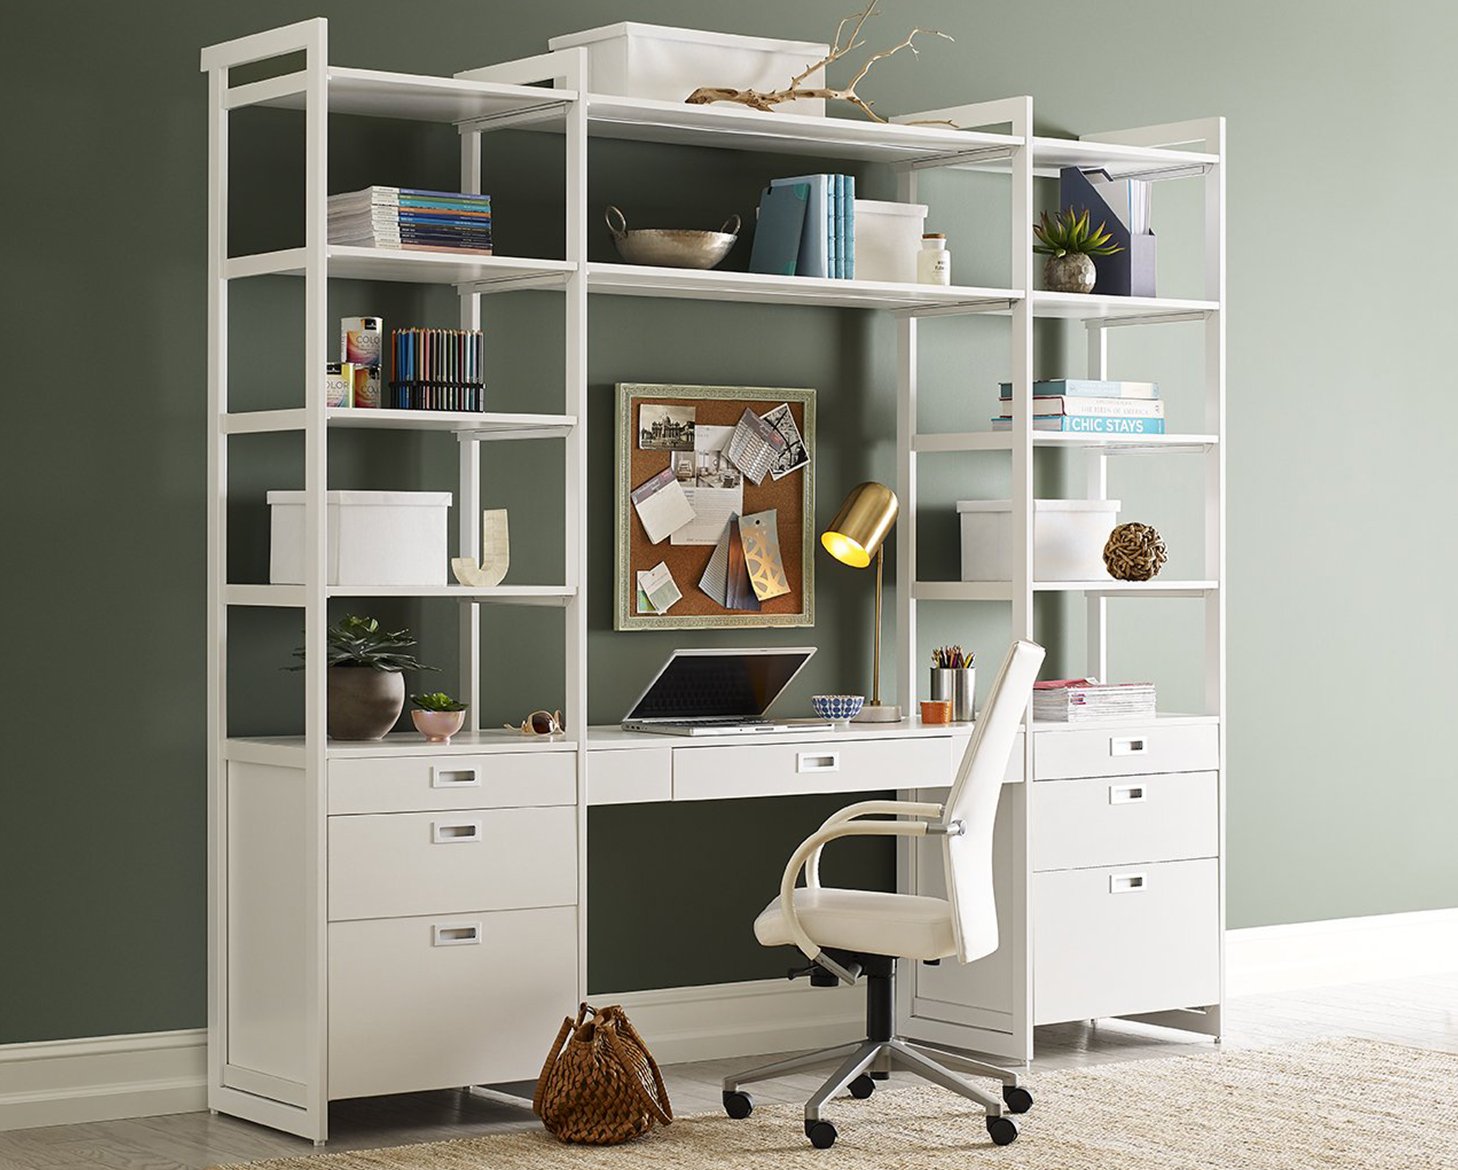 Martha Stewart + California  Closets The Everyday System™ 8ft Home Office & Storage K8066 (12 boxes)